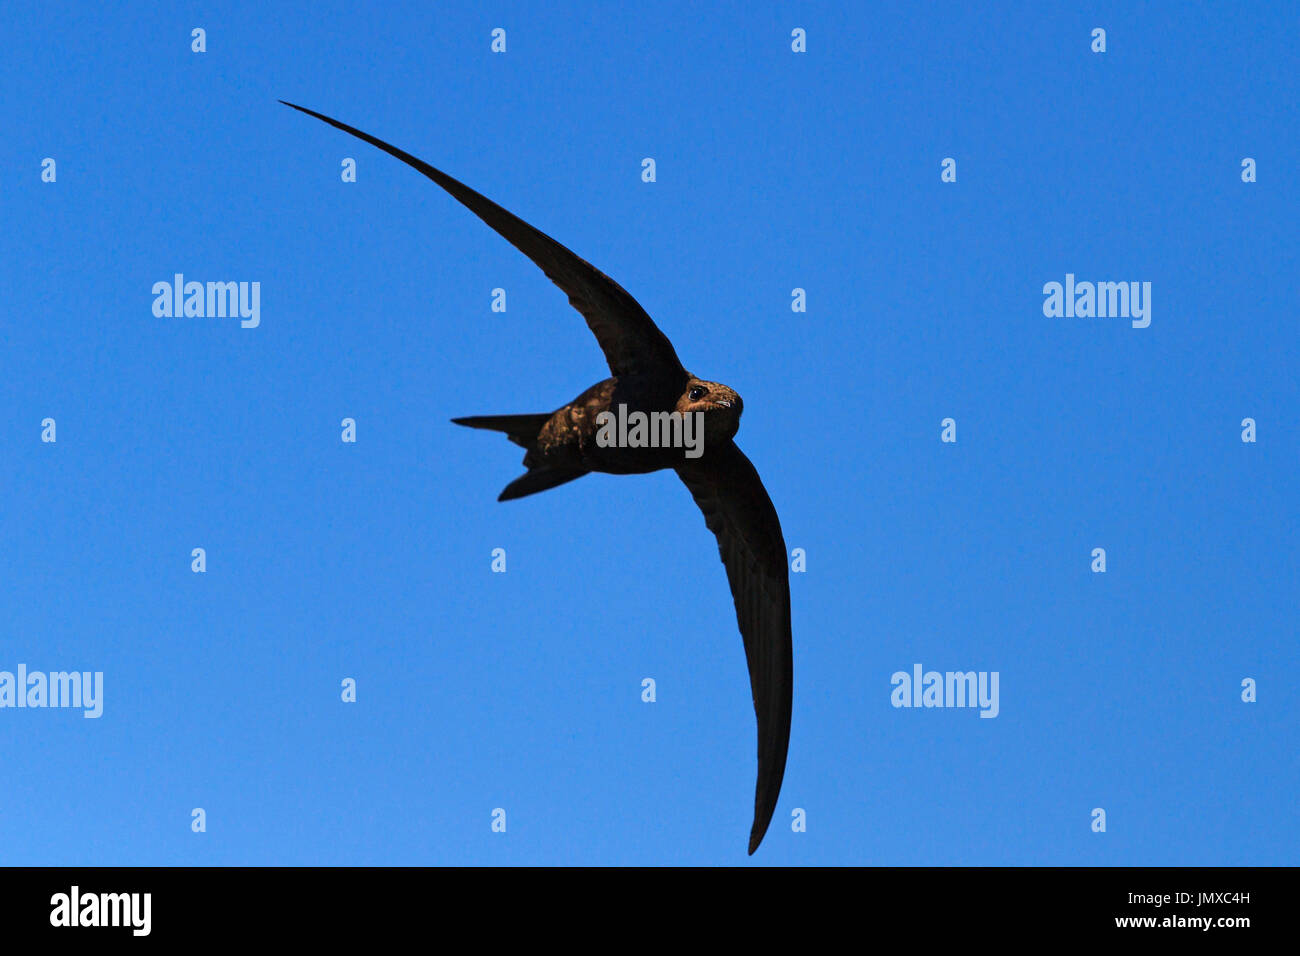 bird with wings in the form of a crescent,wildlife Stock Photo